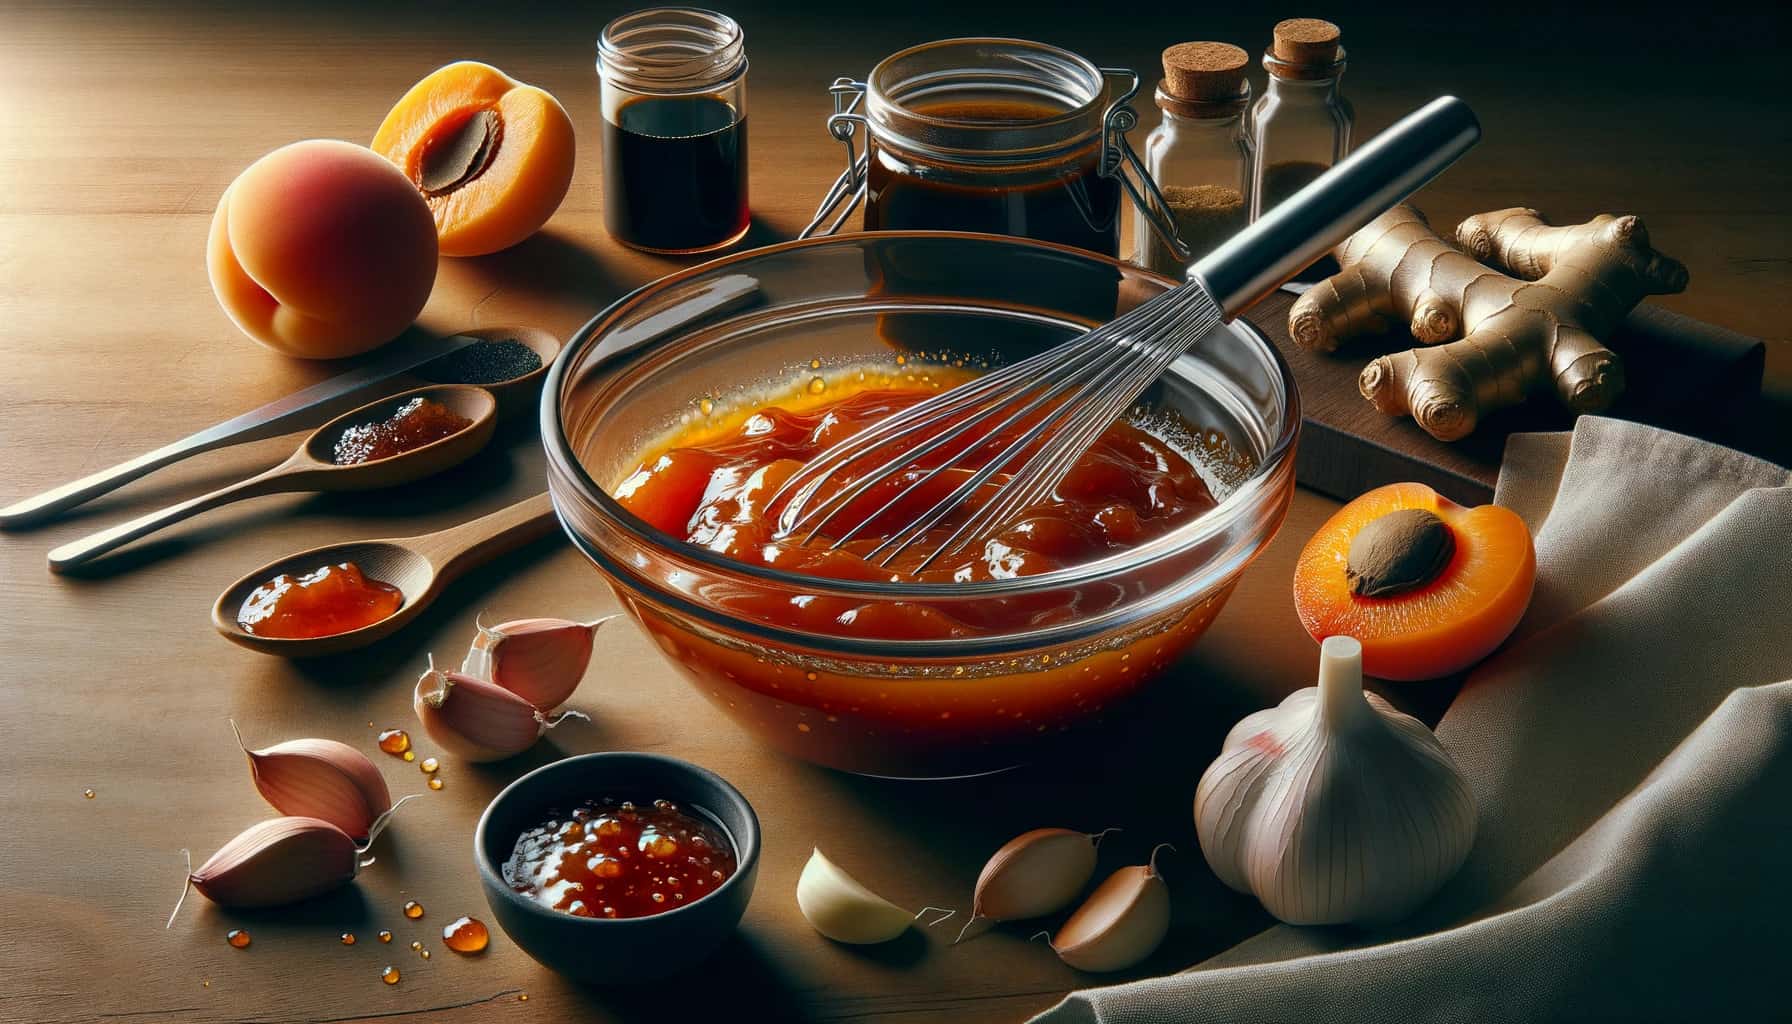 The process of making apricot chicken glaze. A clear glass bowl sits on a wooden countertop. Inside the bowl, a rich apricot sauce is whisked together with visible ingredients like apricot preserves, soy sauce, minced garlic, and ginger.